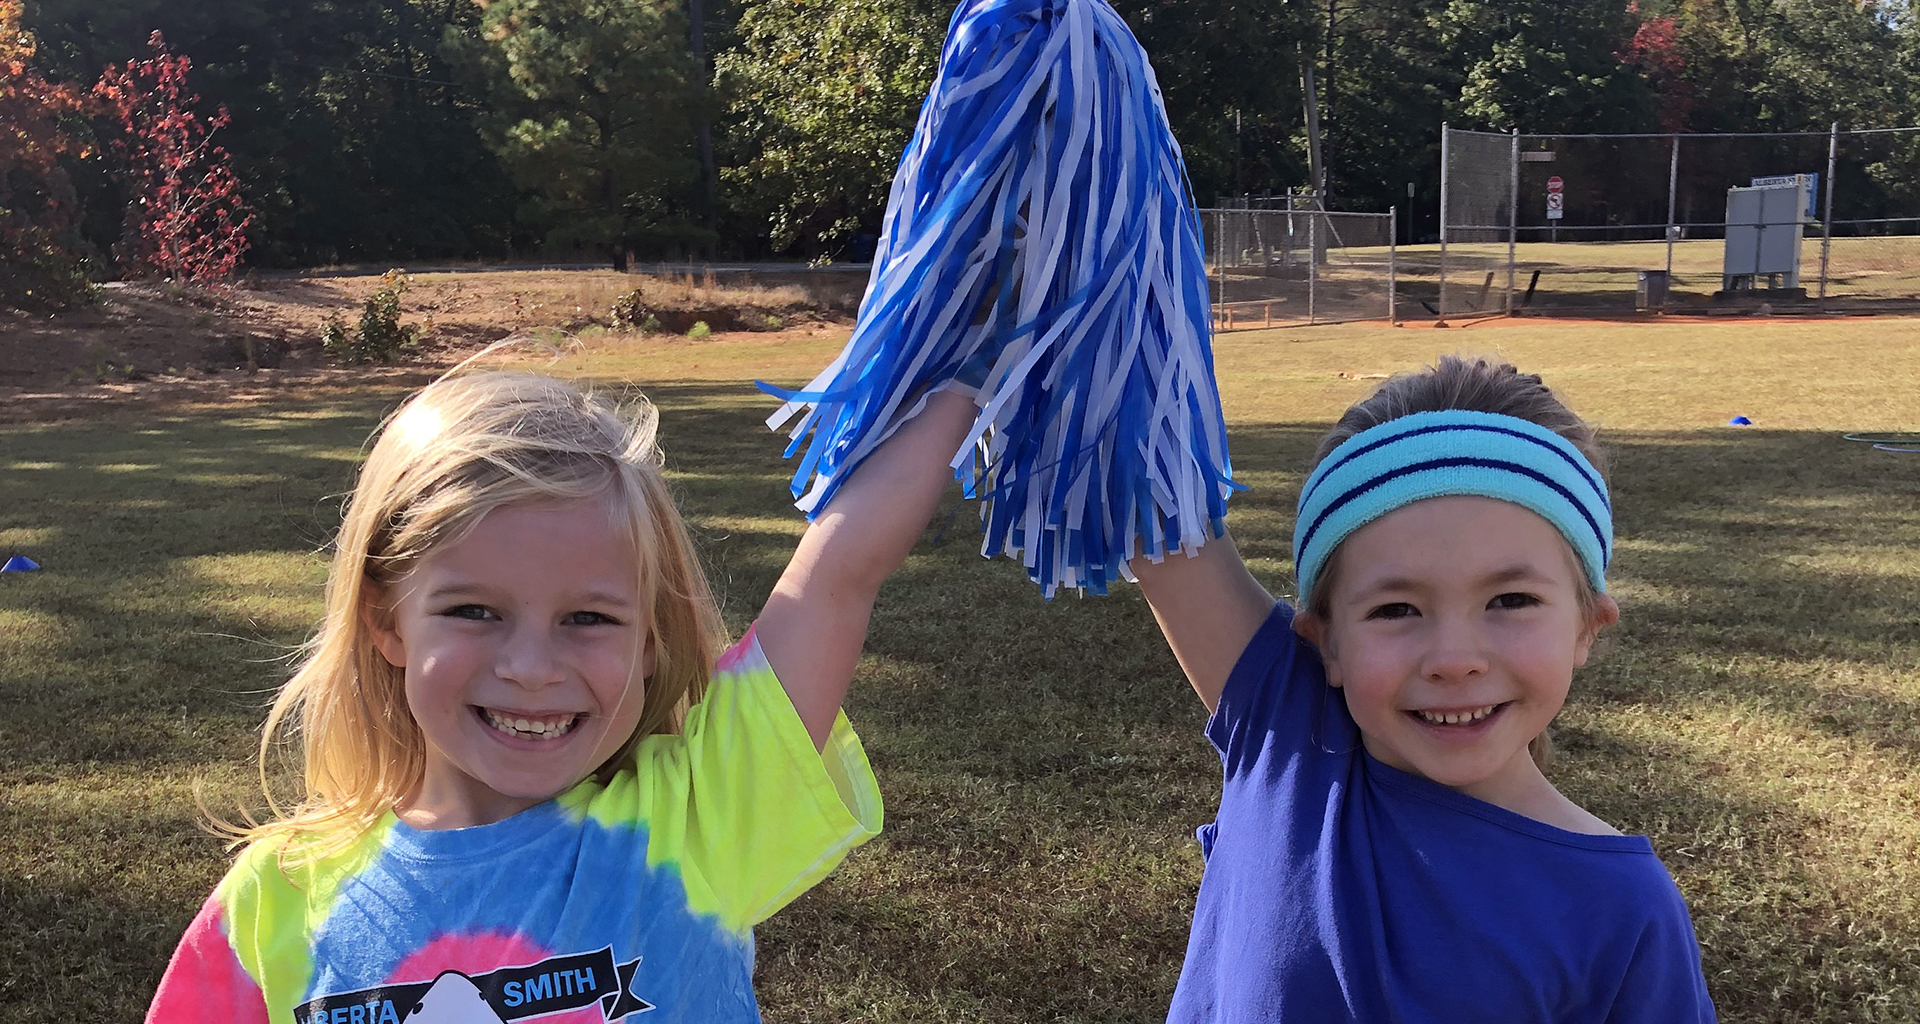 Two girls holding up a pom pom with their hands together in victory.